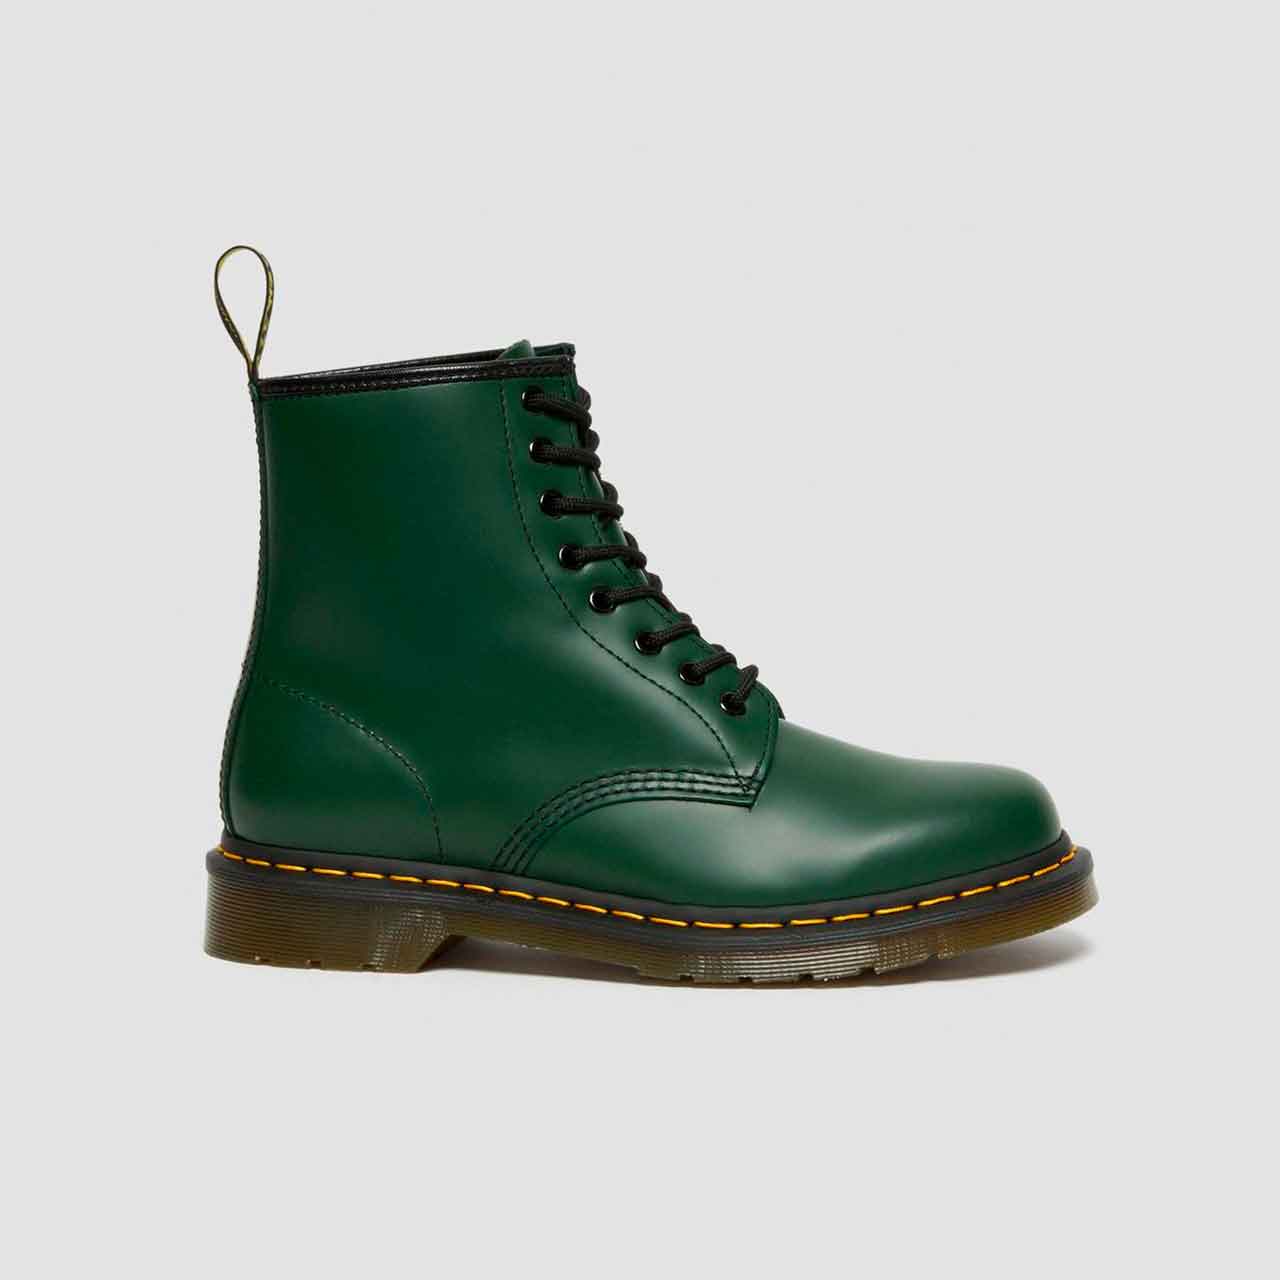 DR. MARTENS 1460 8 Eye Boots Boots – 39